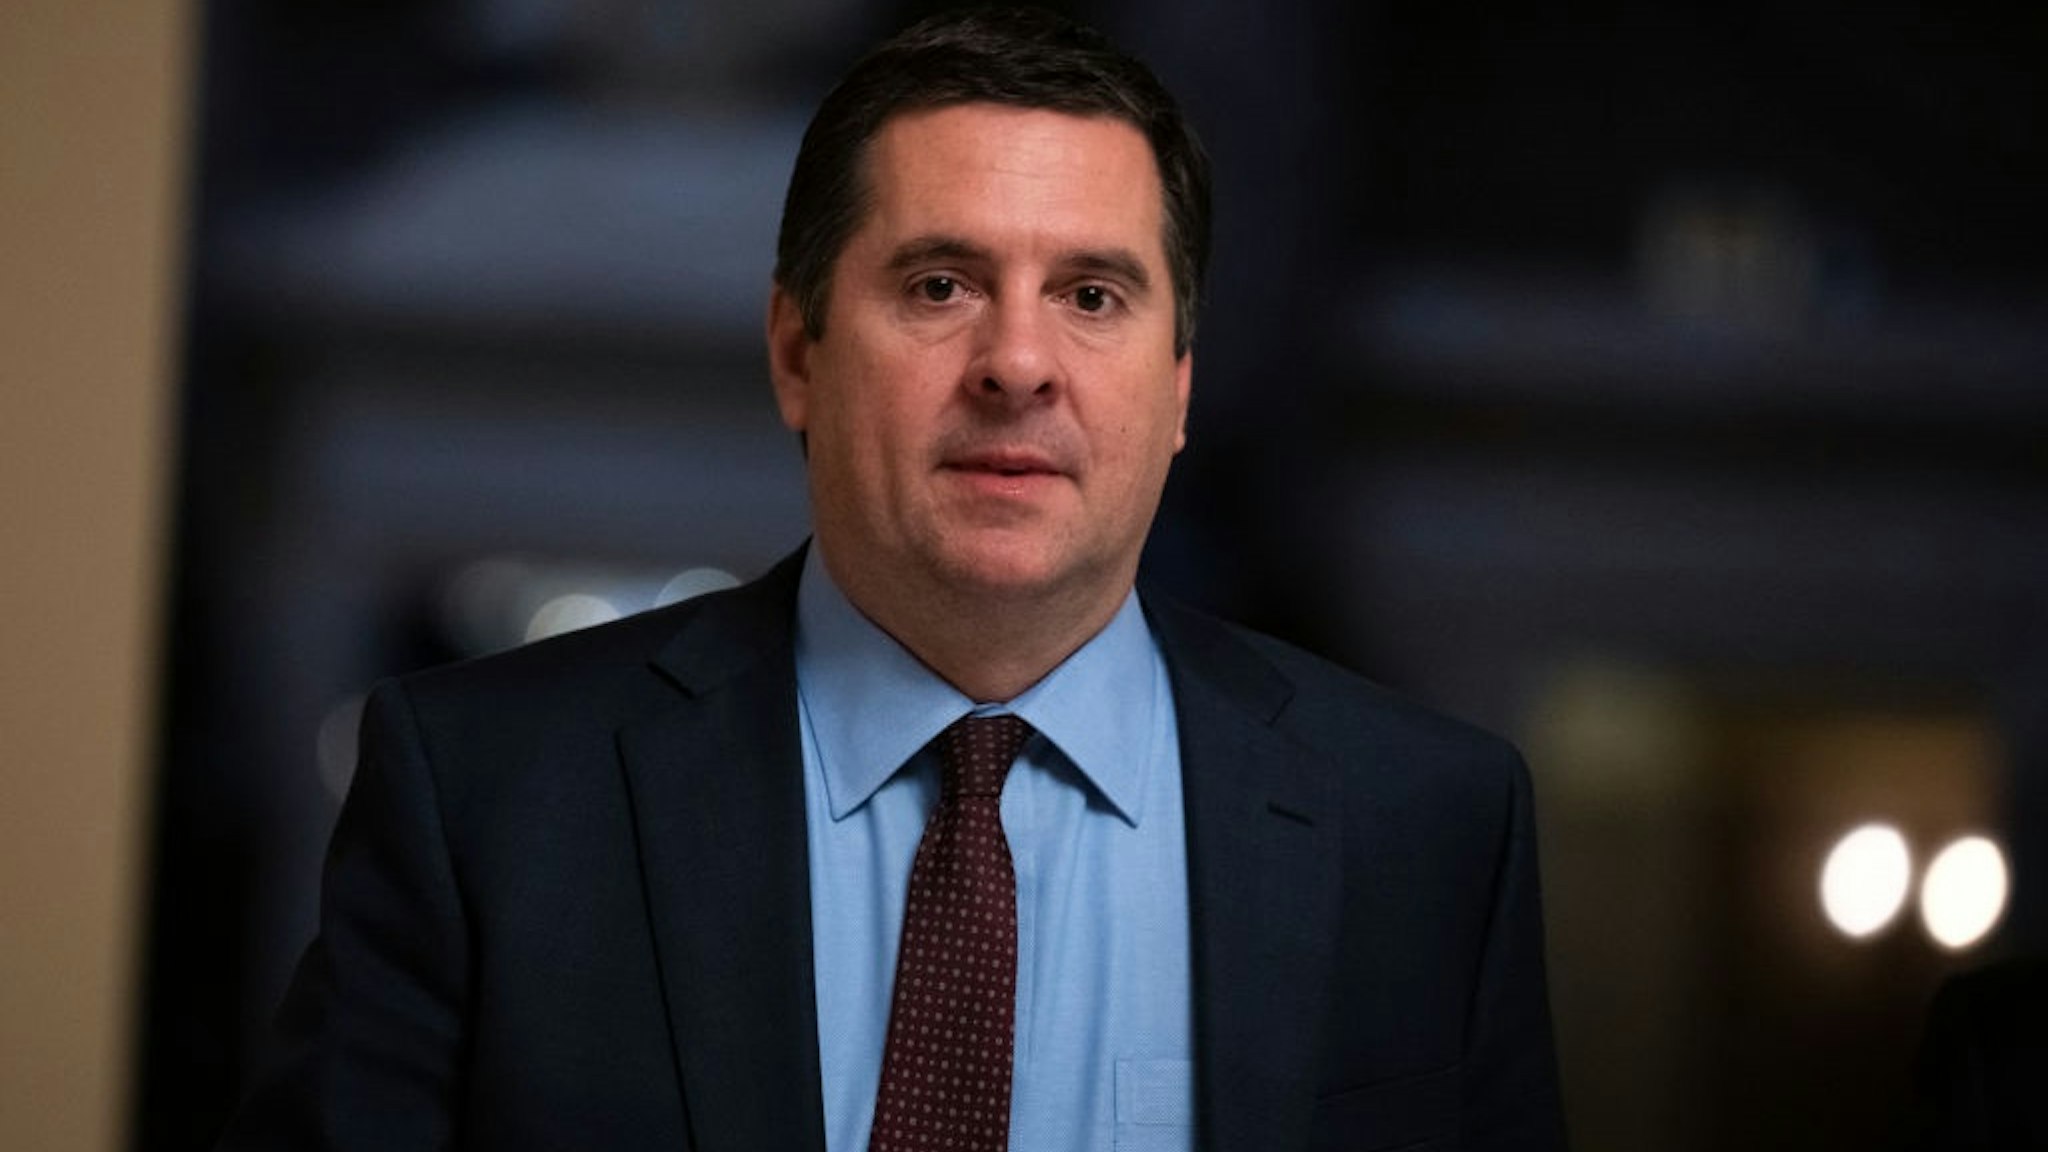 UNITED STATES - DECEMBER 9: Rep. Devin Nunes, R-Calif., is seen in the U.S. Capitol on Thursday, December 9, 2021.